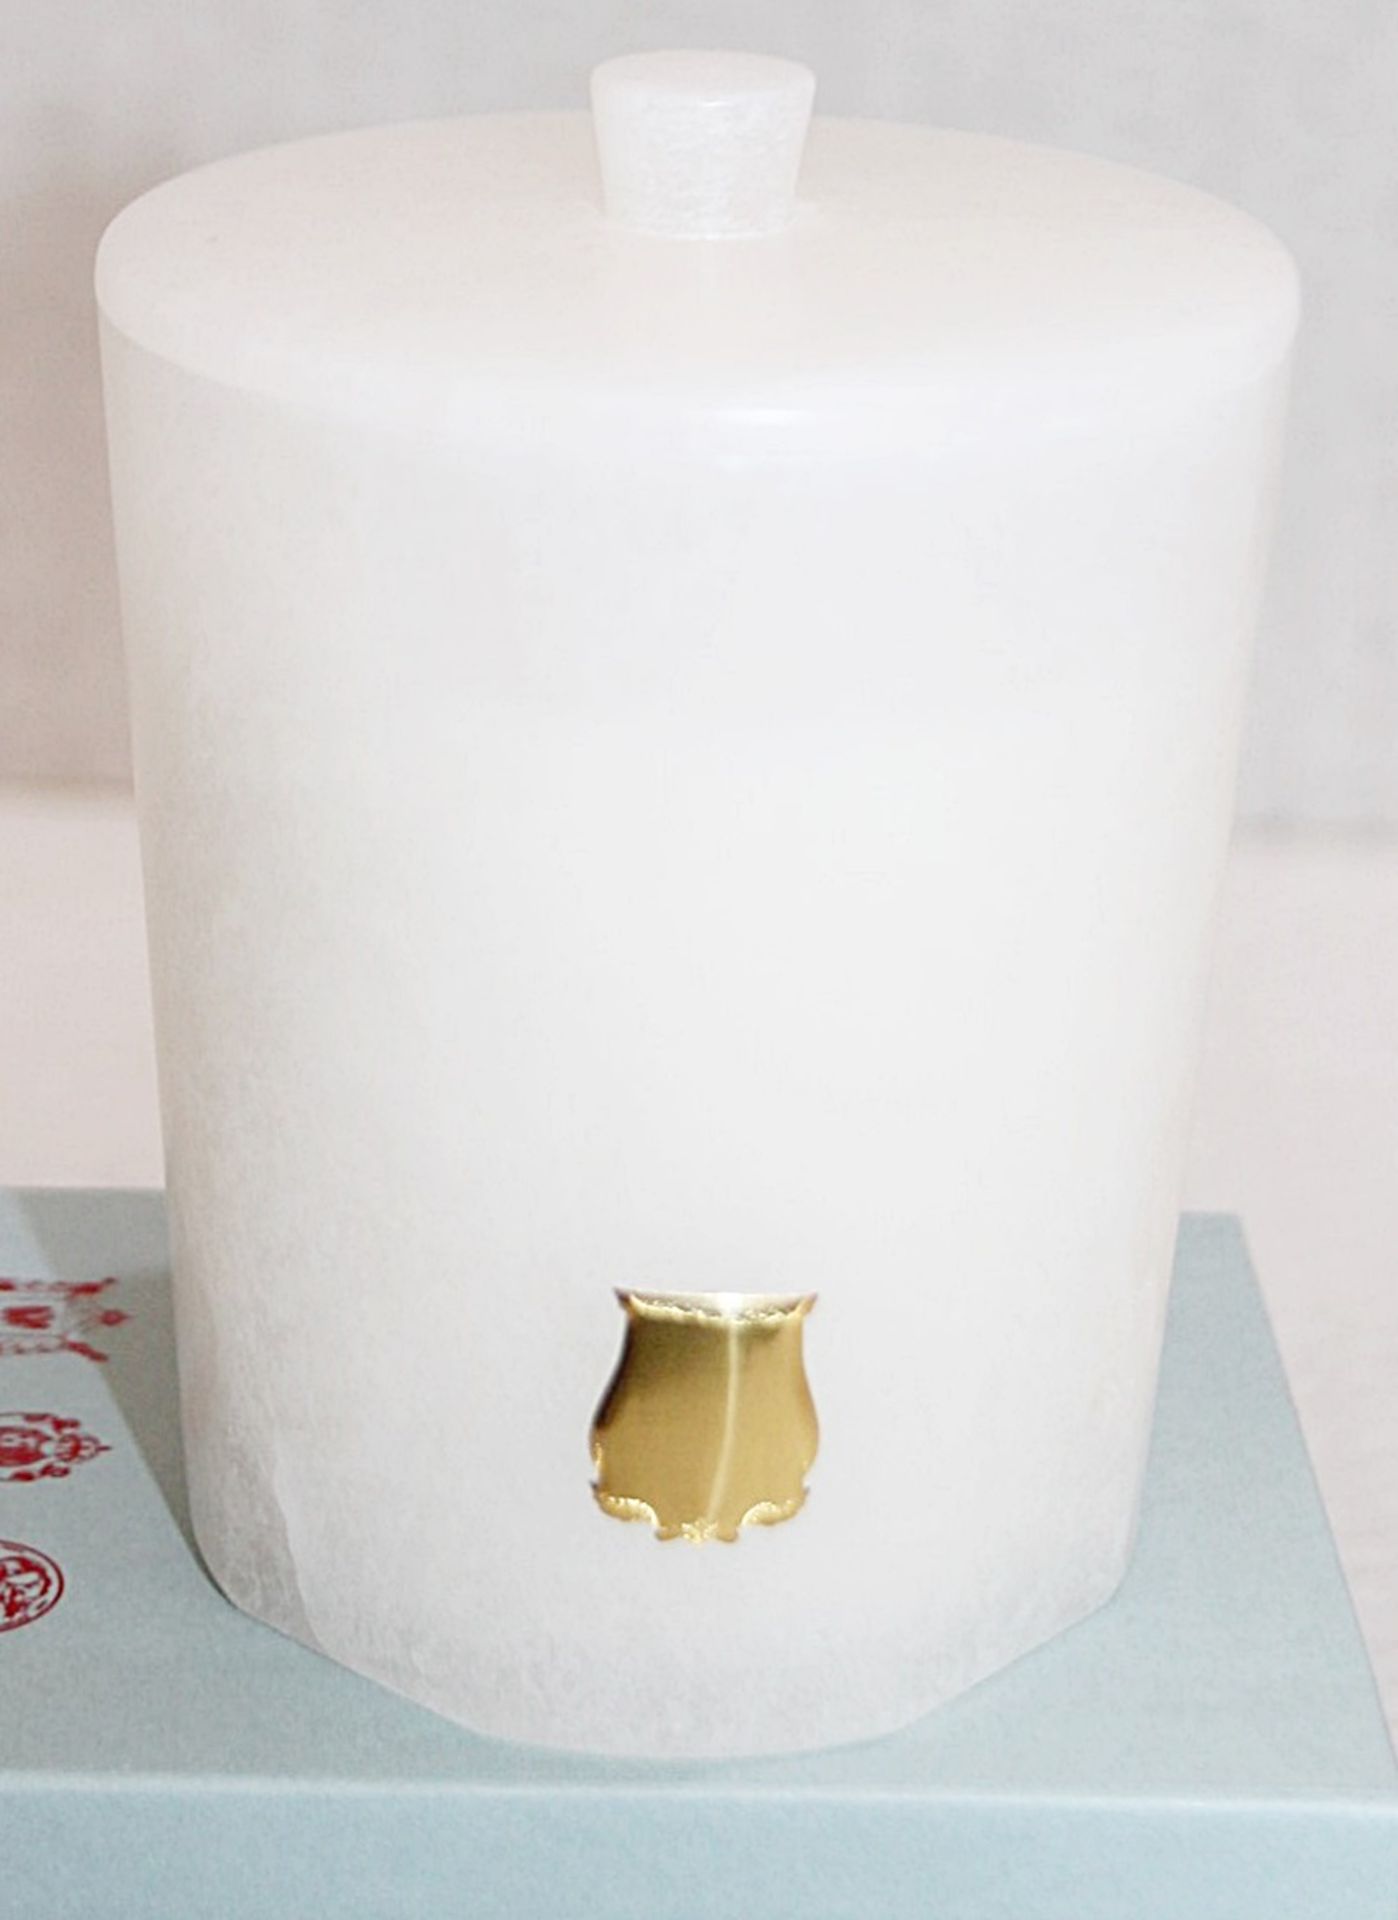 1 x TRUDON Luxury 'Hemera' Scented Candle In Alabaster (270g) - Original Price £170.00 - Boxed Stock - Image 2 of 12